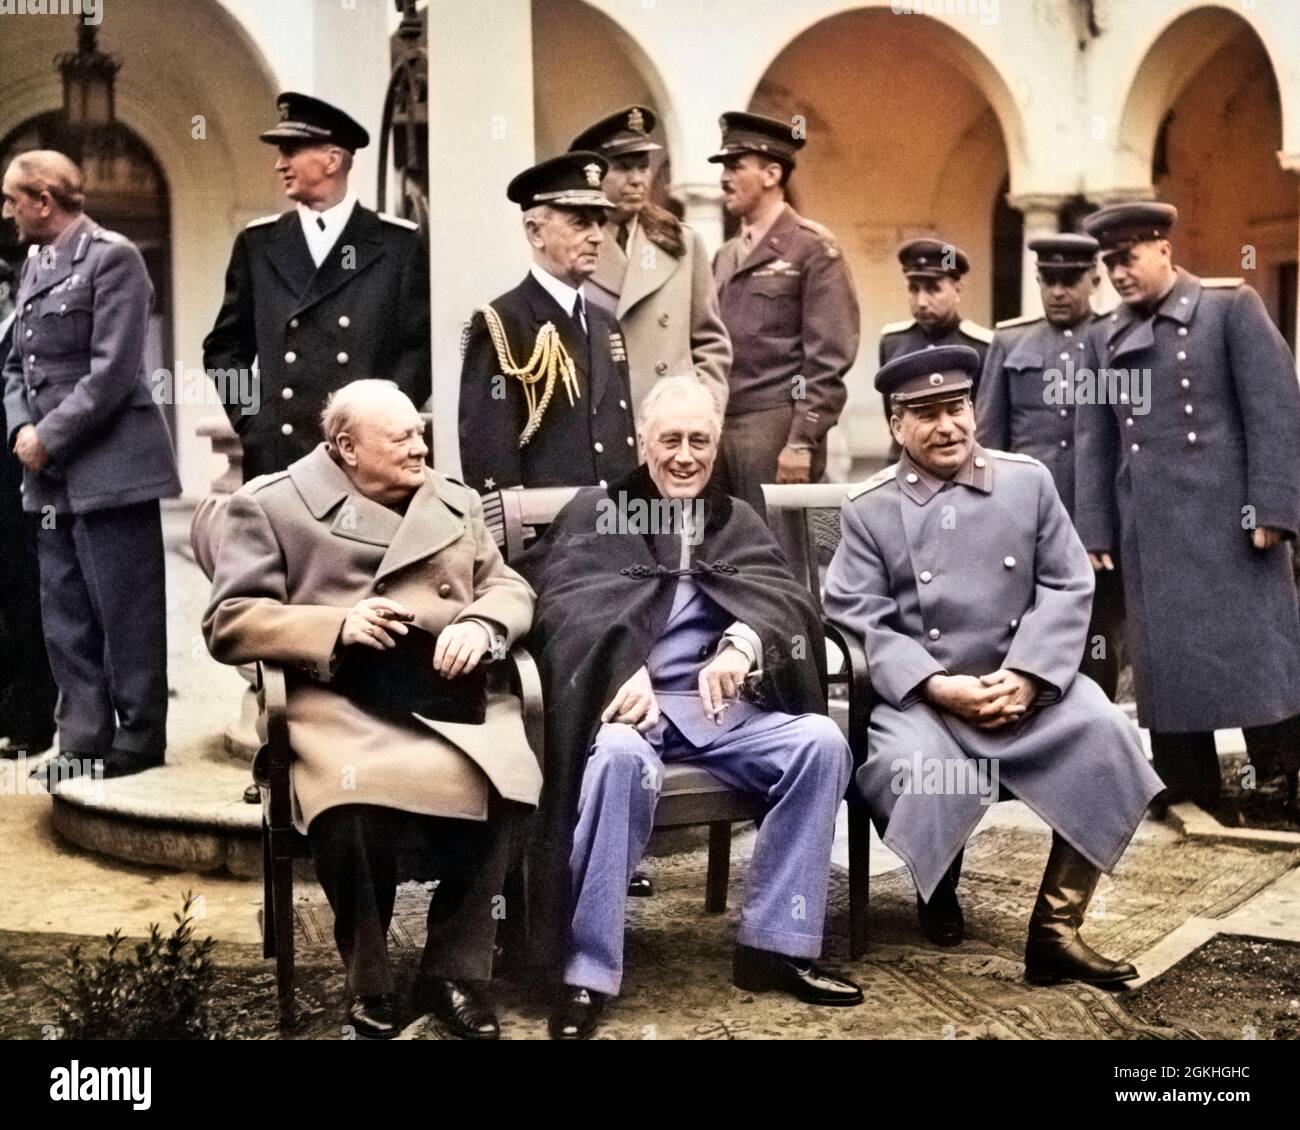 1940s WINSTON CHURCHILL FRANKLIN D. ROOSEVELT JOSEPH STALIN AT YALTA FEBRUARY 1945 IN THE PATIO OF LIVADIA PALACE - q73016c CPC001 HARS FAMOUS LEADERSHIP POWERFUL WORLD WARS JOSEPH POSTWAR PRESIDENTIAL WORLD WAR WORLD WAR TWO WORLD WAR II AUTHORITY NEGOTIATION PALACE POLITICS PRESIDENTS DELANO CRIMEA FEBRUARY WORLD WAR 2 FRANKLIN ROOSEVELT STALIN JOSEF WINSTON CHURCHILL YALTA 1945 BIG THREE D JOSEF STALIN JOSEPH STALIN LEADERS LIVADIA LIVADIA PALACE PERSONALITIES SOLUTIONS ALLIES CAUCASIAN ETHNICITY FAMOUS PERSON OLD FASHIONED PRIME MINISTER Stock Photo